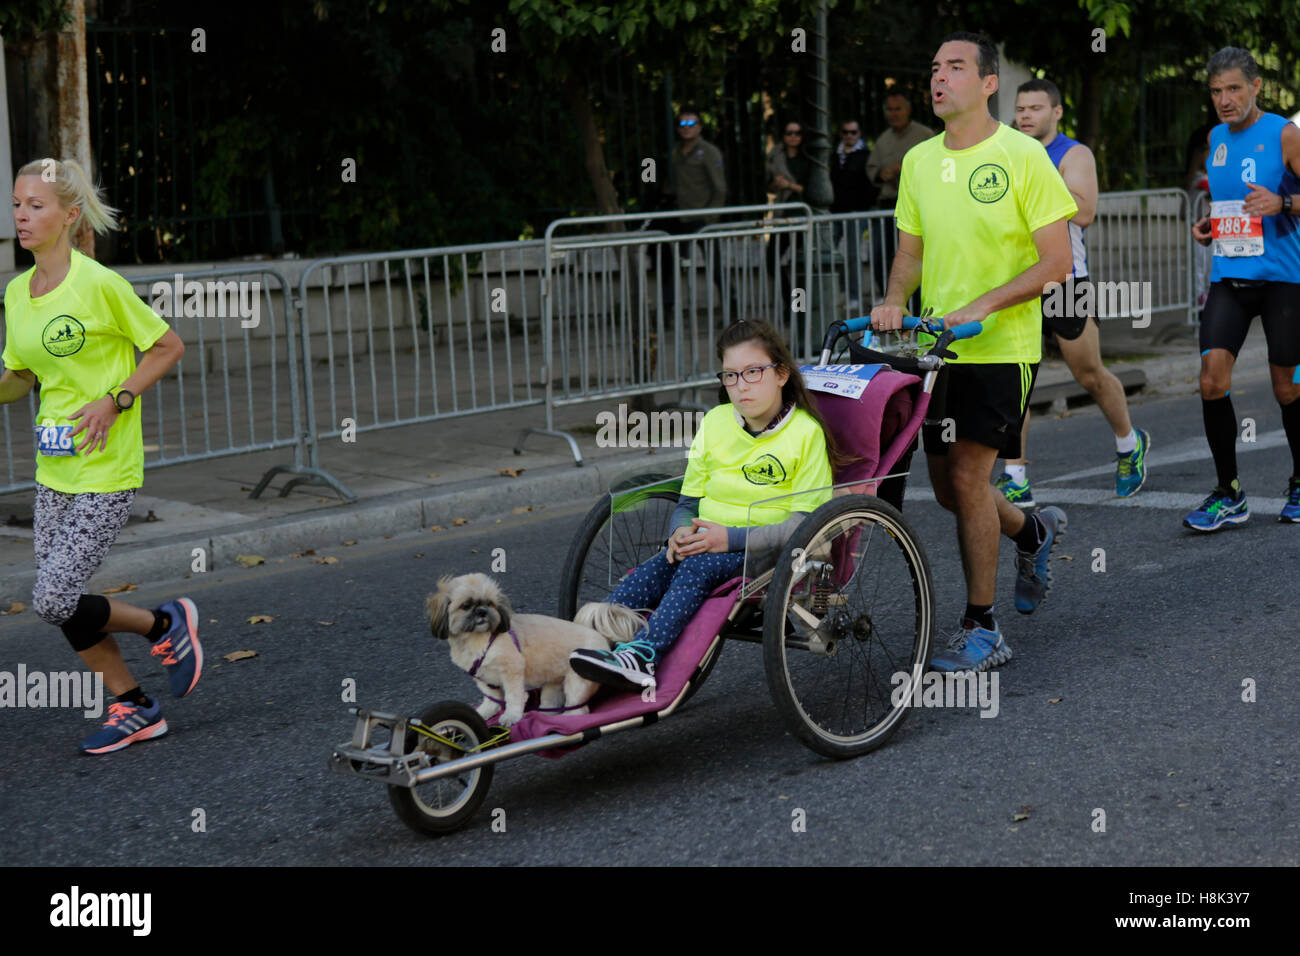 Athens, Greece. 13th Nov, 2016. A runner pushes a girl and a dog in a wheel chair. Thousands of people from all over the world took part in the 2016 Athens Marathon the Authentic, which starts in the town of Marathon and is ending in Athens, the route, which according to legend was first run by the Greek messenger Pheidippides in 490 BC. © Michael Debets/Pacific Press/Alamy Live News Stock Photo